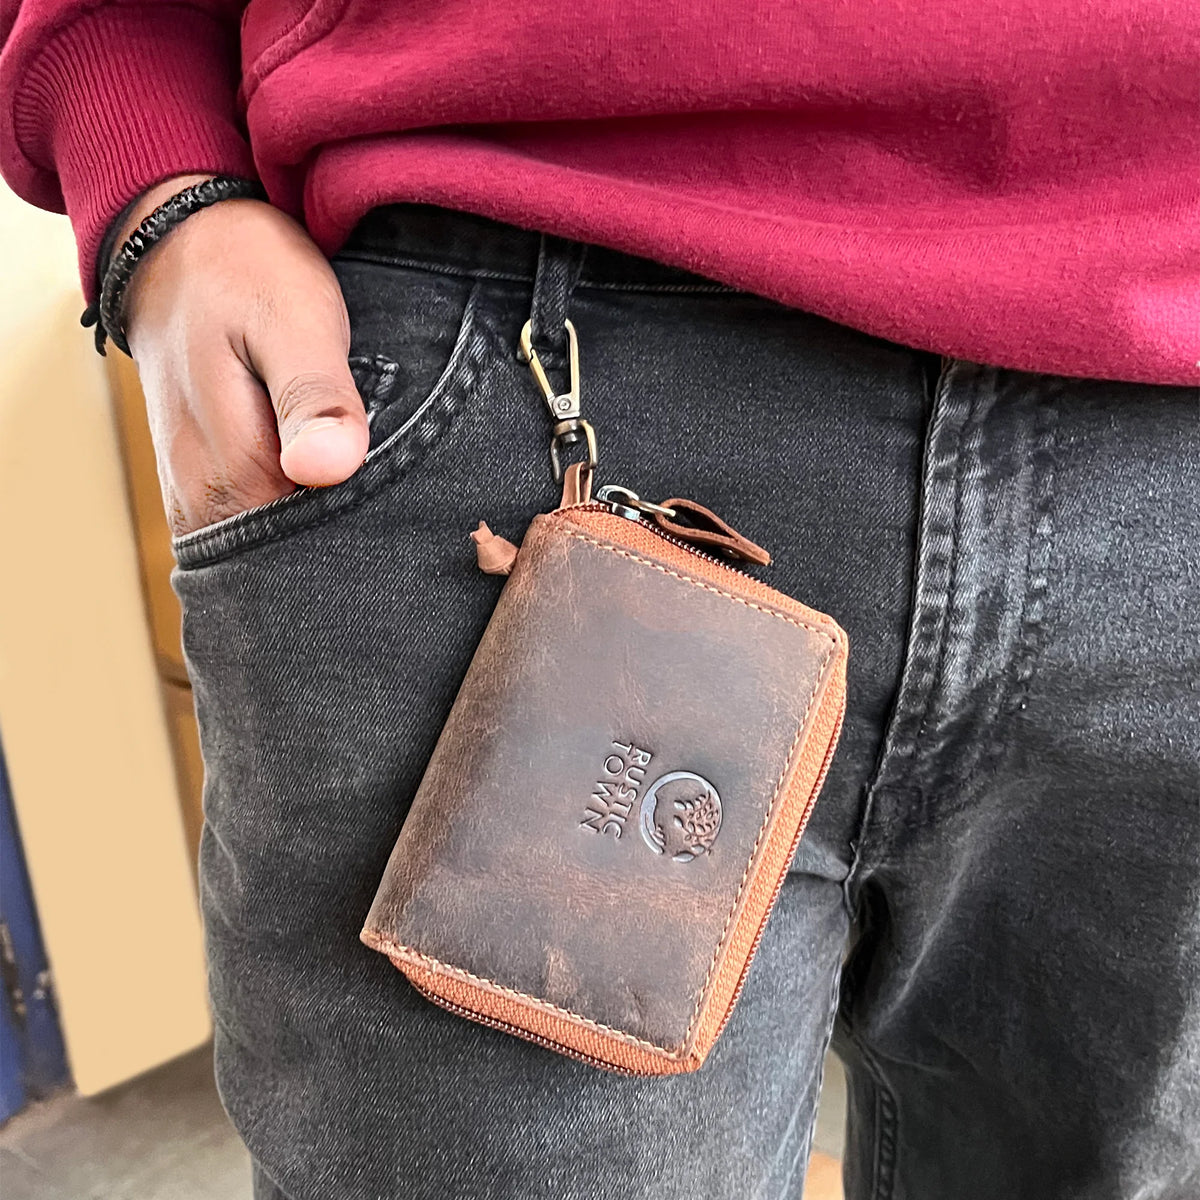  RUSTIC TOWN Leather Key Case Holder - Zippered Key Organizer  Wallet with 8 Hooks for Keys, Cash, and Card - Gift for Men and Women  (Brown) : Clothing, Shoes & Jewelry